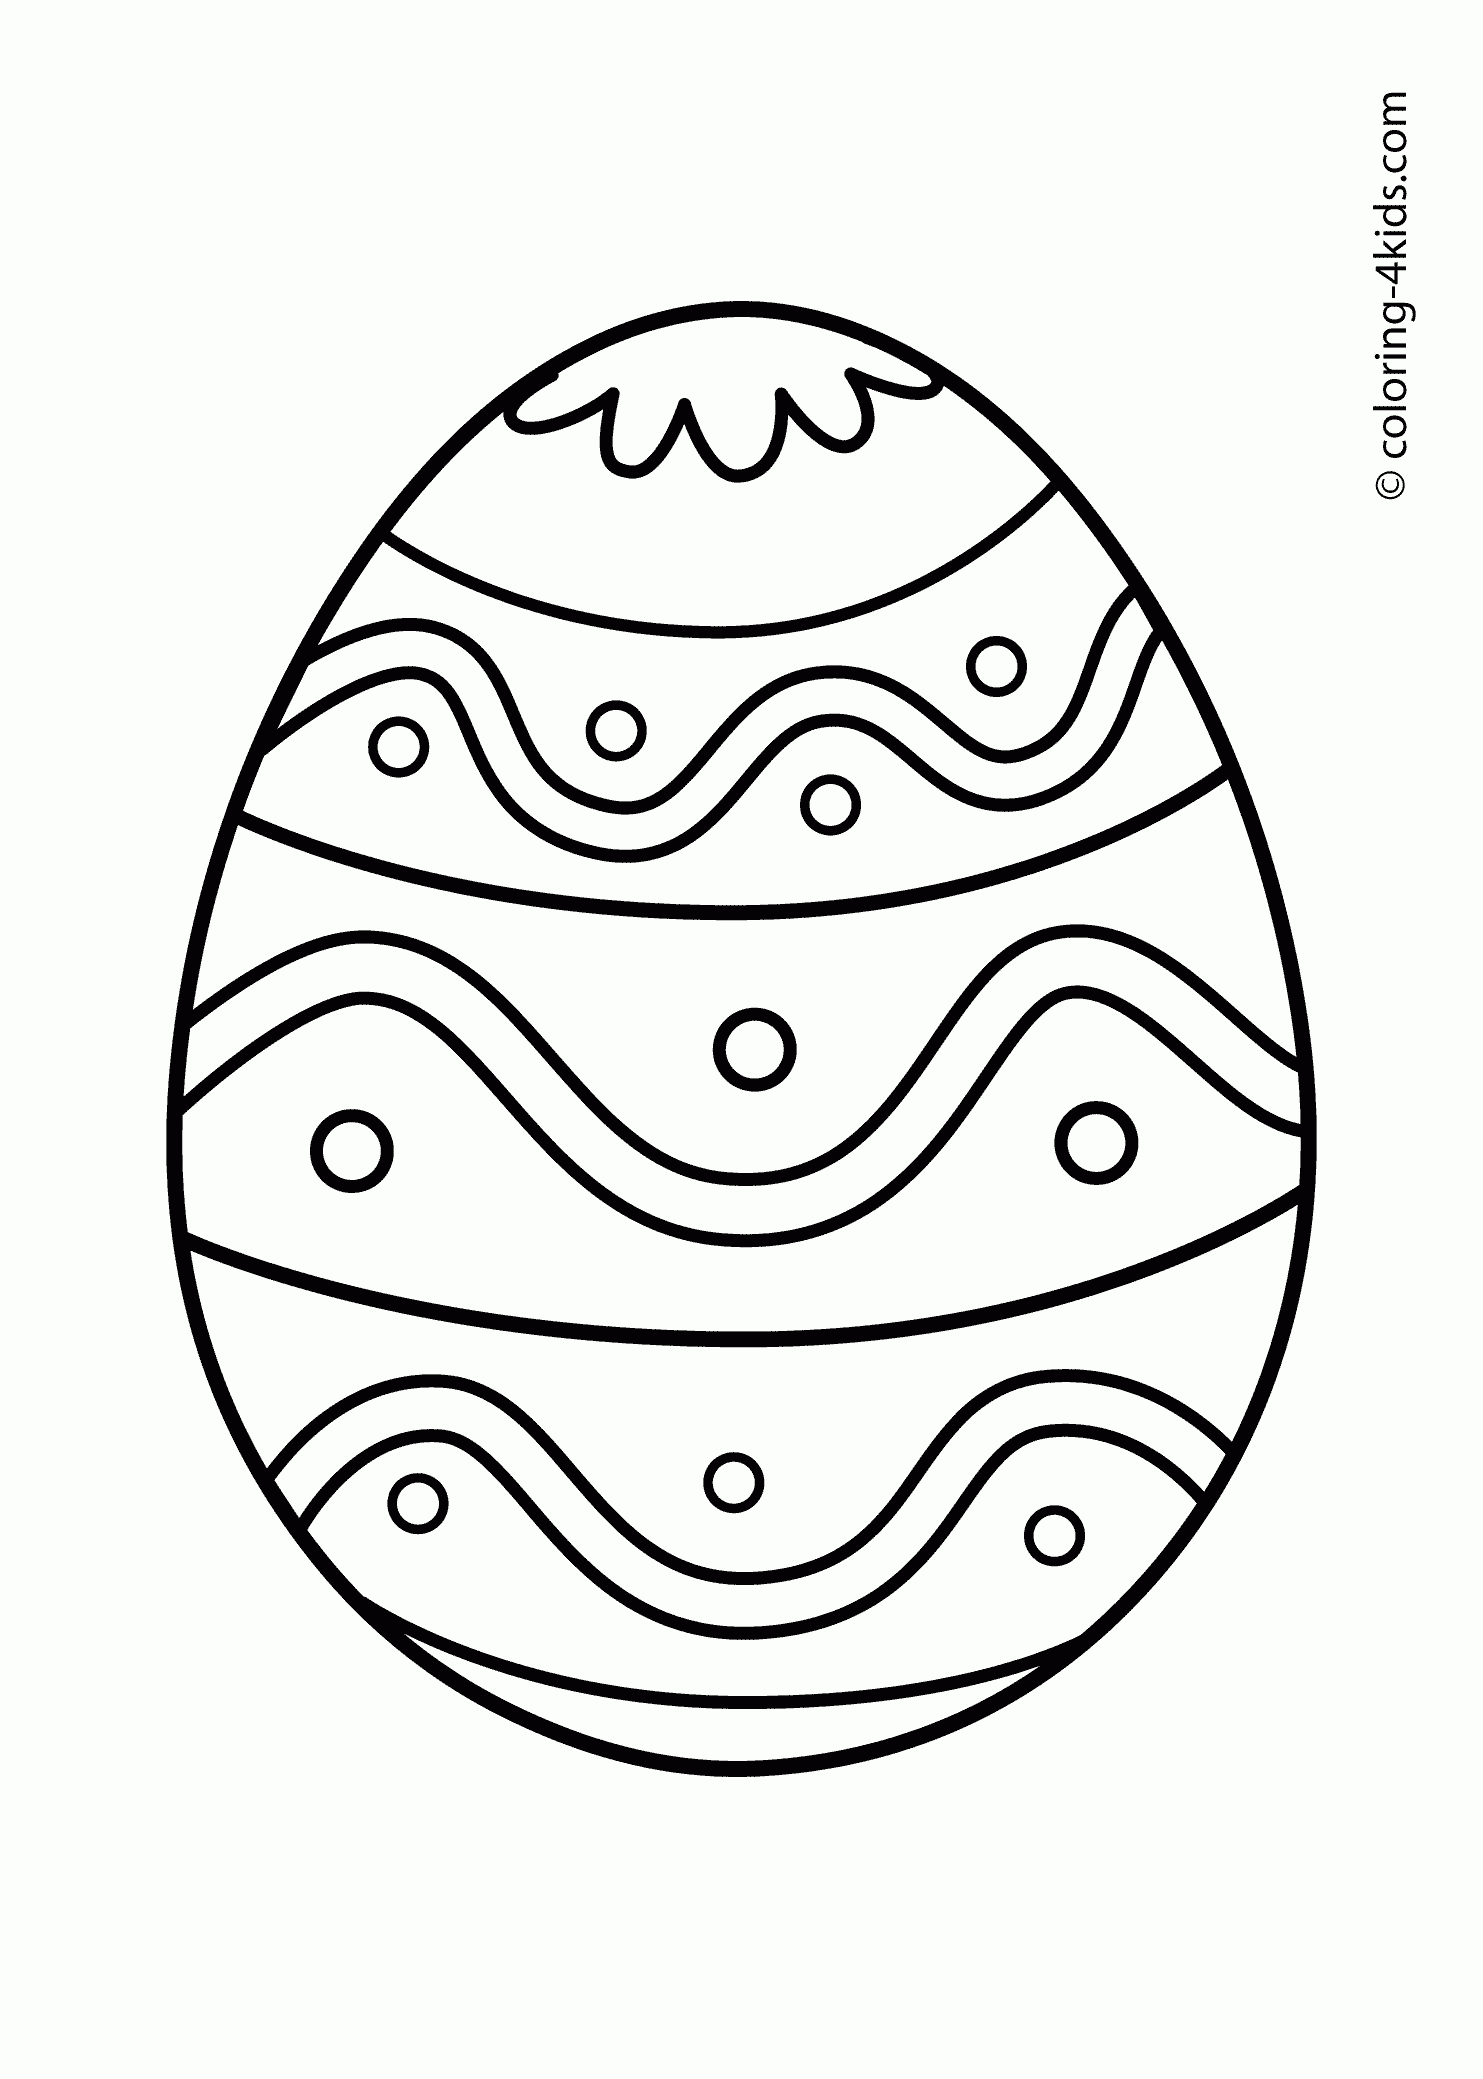 Free Printable Easter Eggs – Happy Easter &amp;amp; Thanksgiving 2018 - Free Printable Easter Drawings